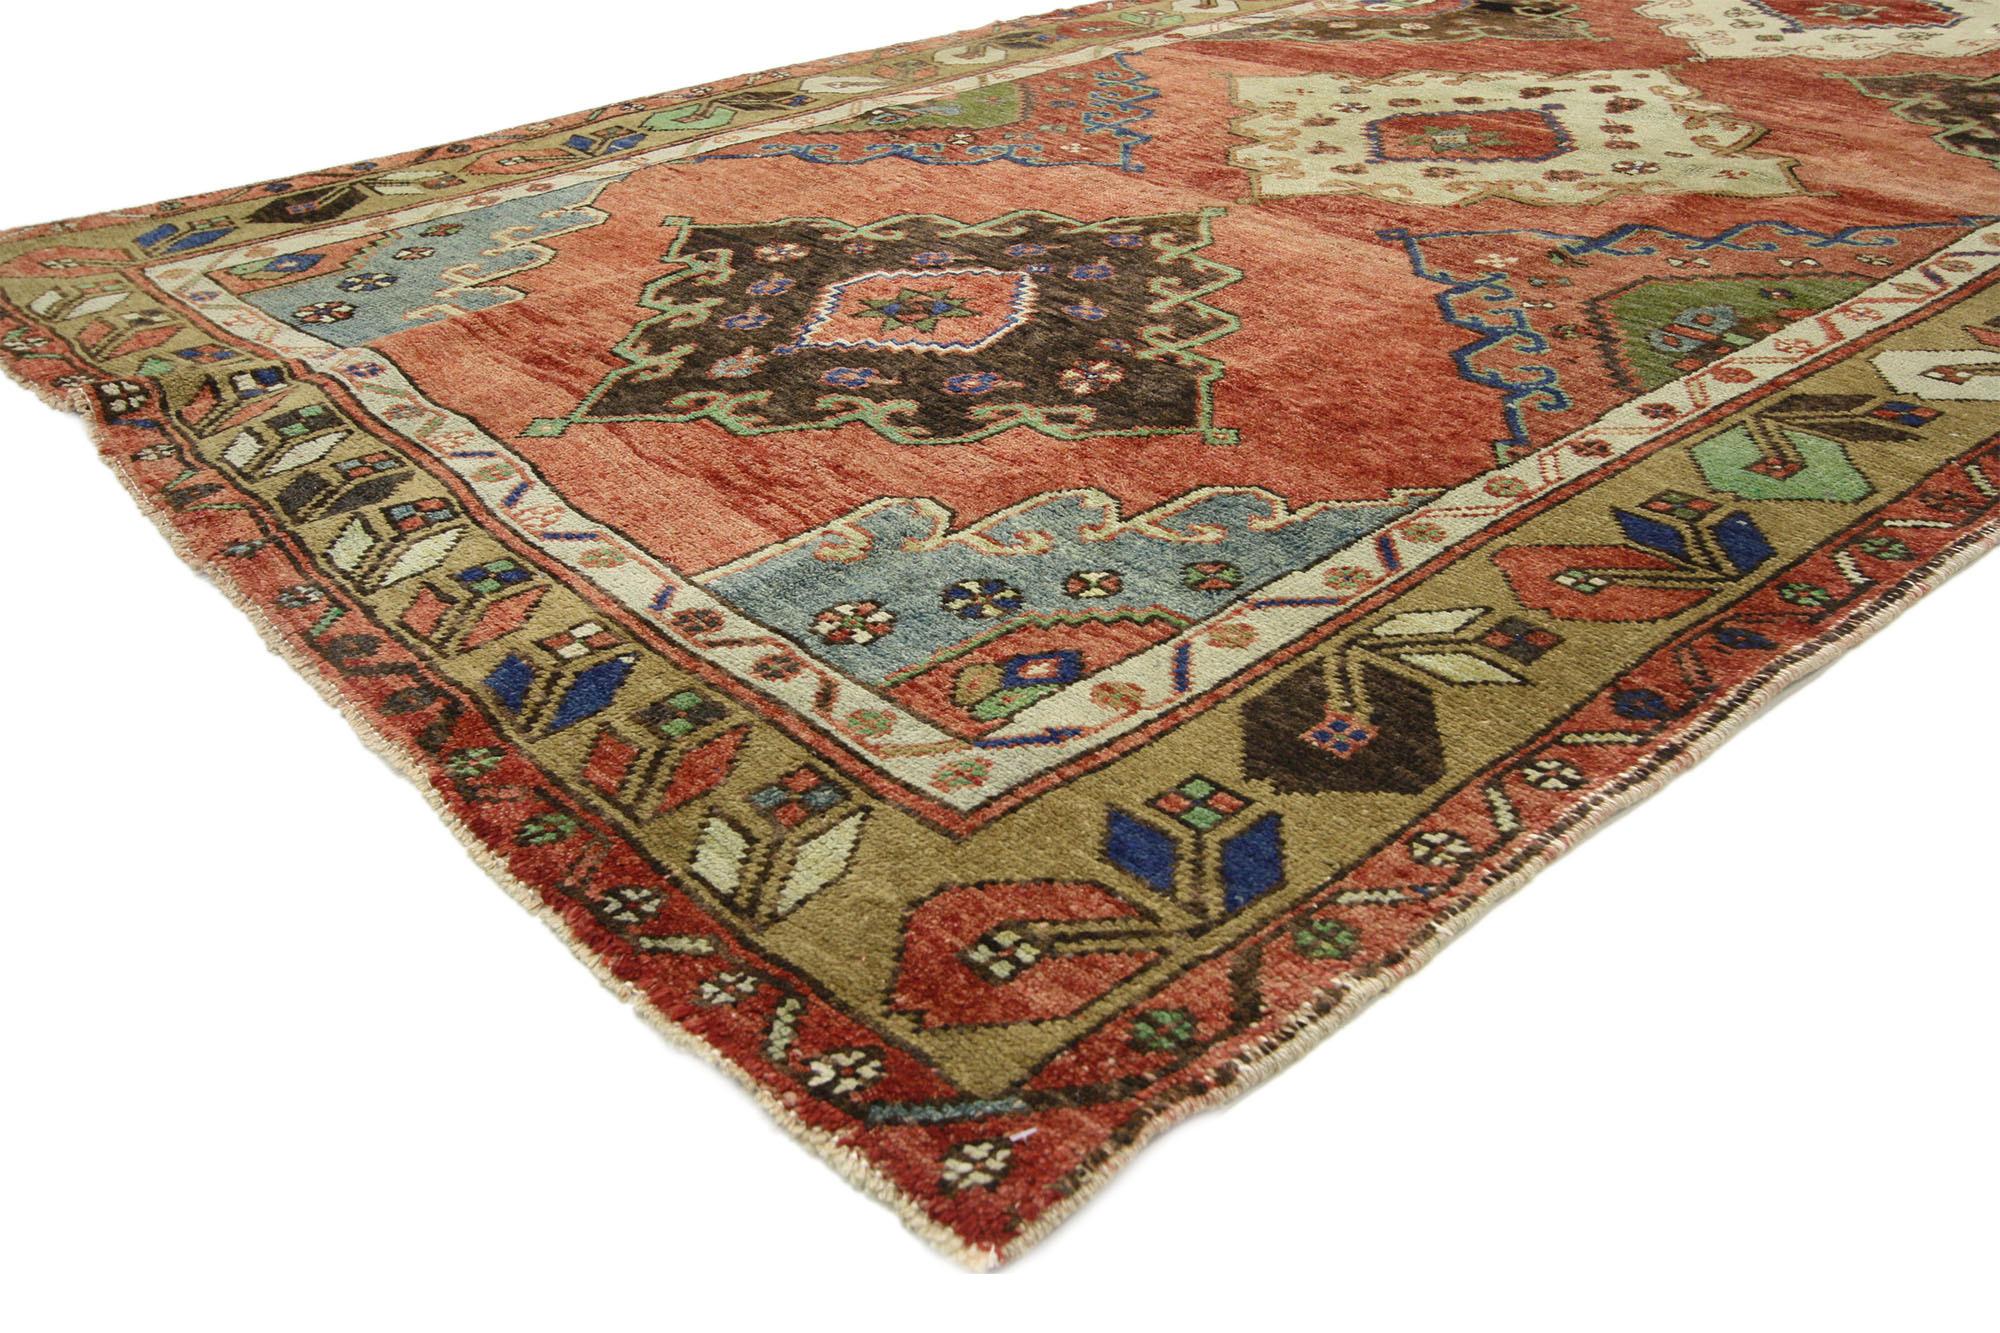 52416 Vintage Turkish Oushak Rug, 05'00 x 13'02. Exuding timeless elegance and intricate craftsmanship, this hand-knotted wool vintage Turkish Oushak rug runner boasts a mesmerizing array of captivating details. Five cusped medallions, each adorned